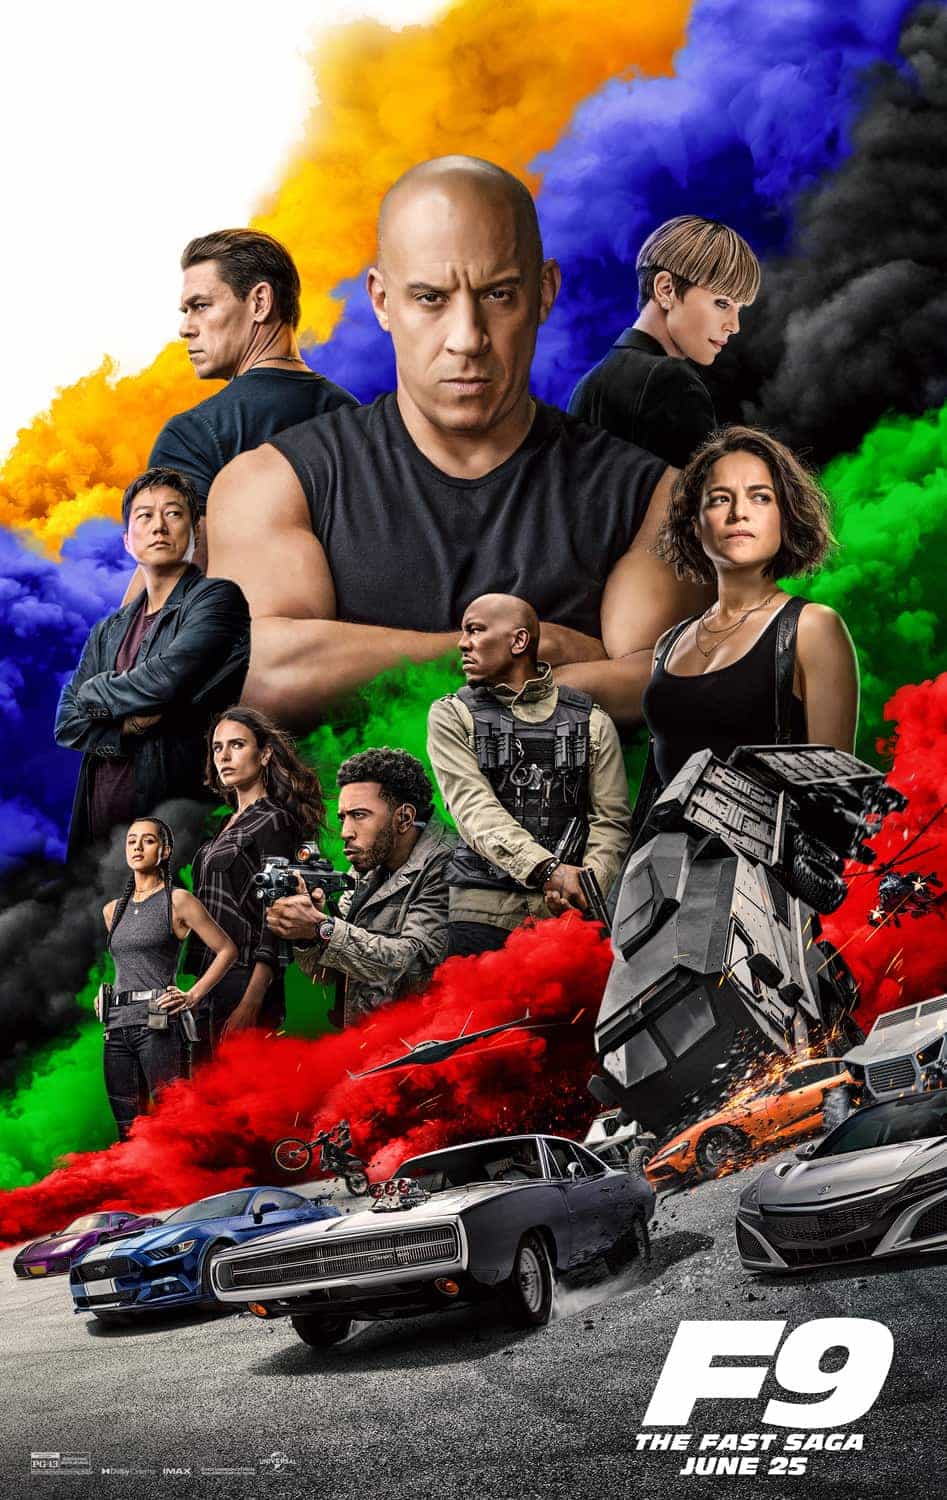 New Fast And Furious 9 trailer ahead of July 9th 2021 release date